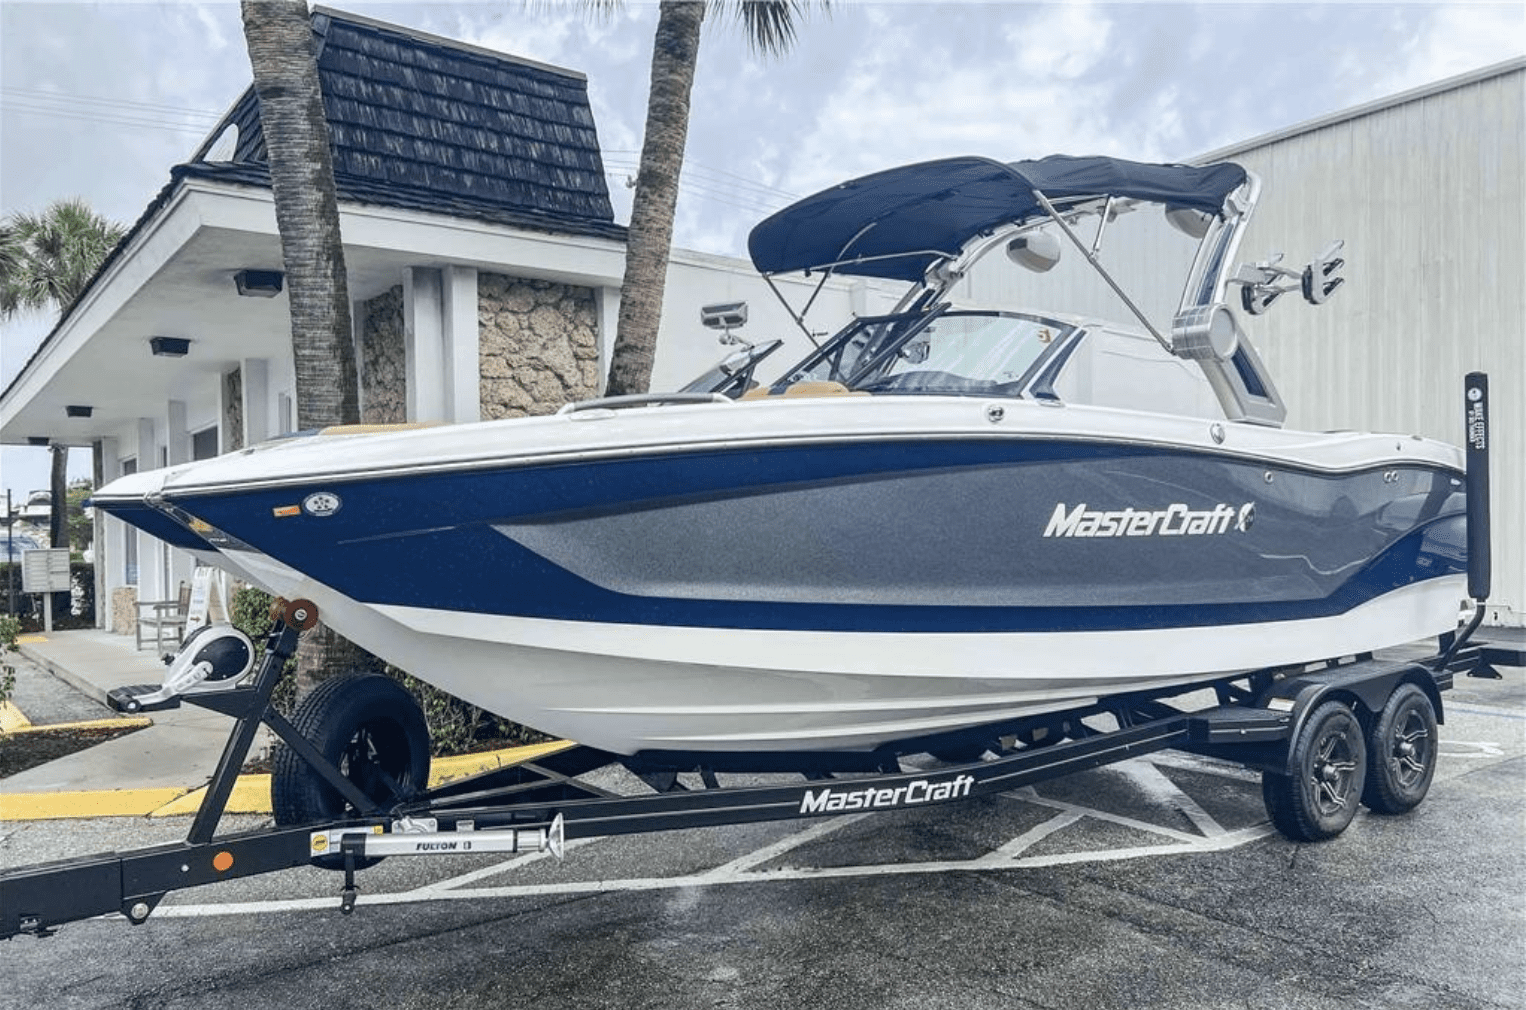 A 2023 MasterCraft X24 boat parked in a parking lot.